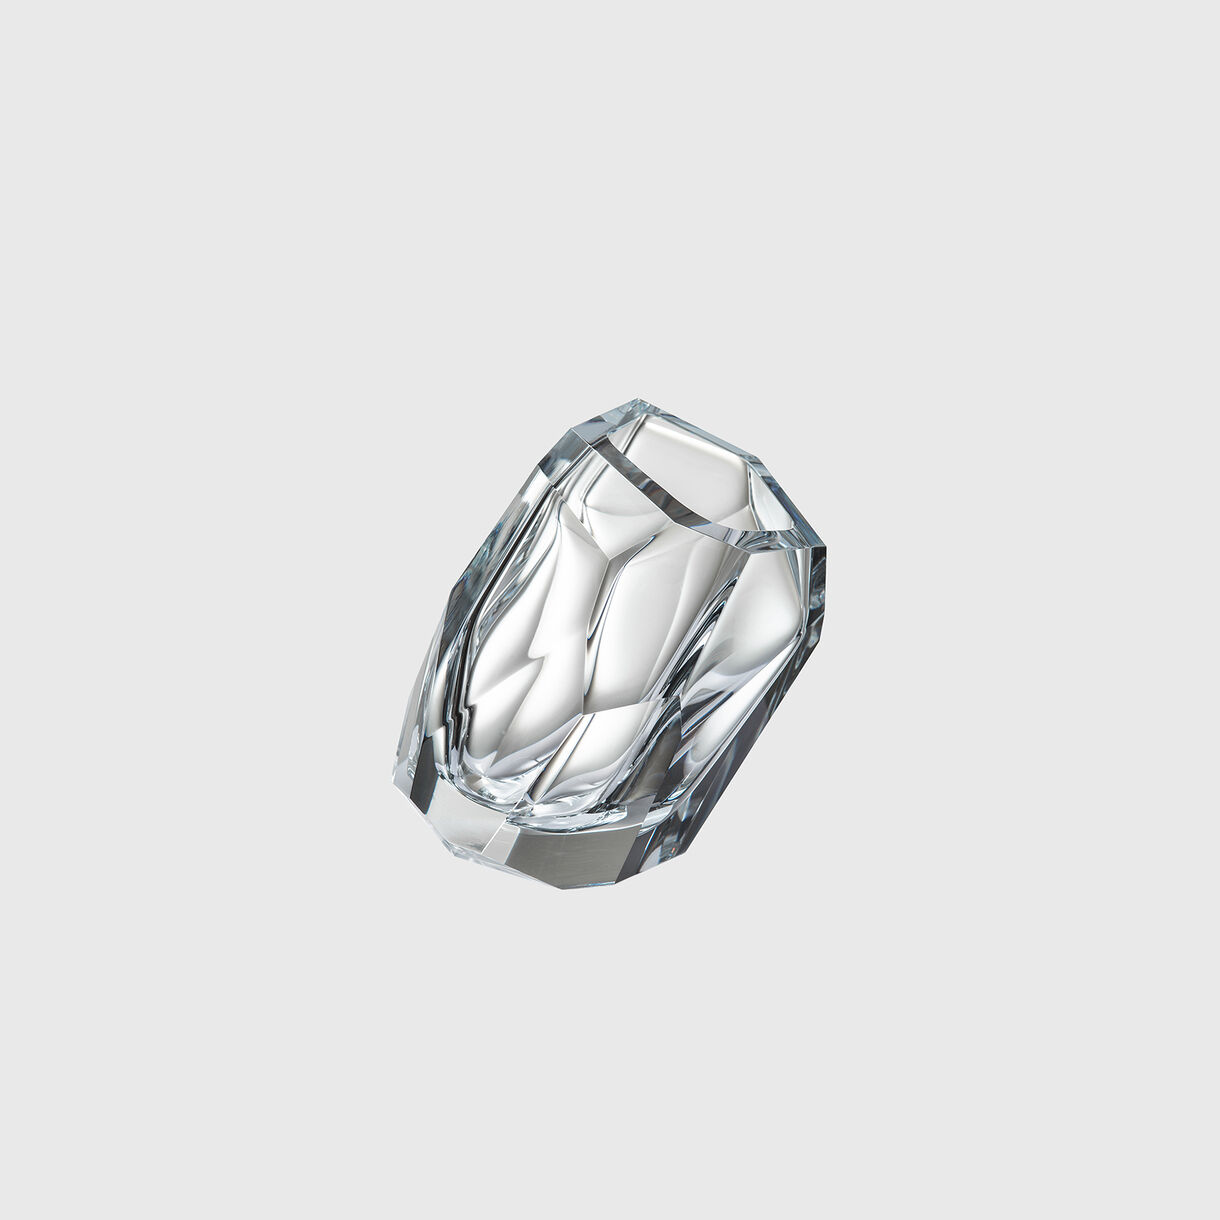 Crystal Rock Vase, Small, Clear